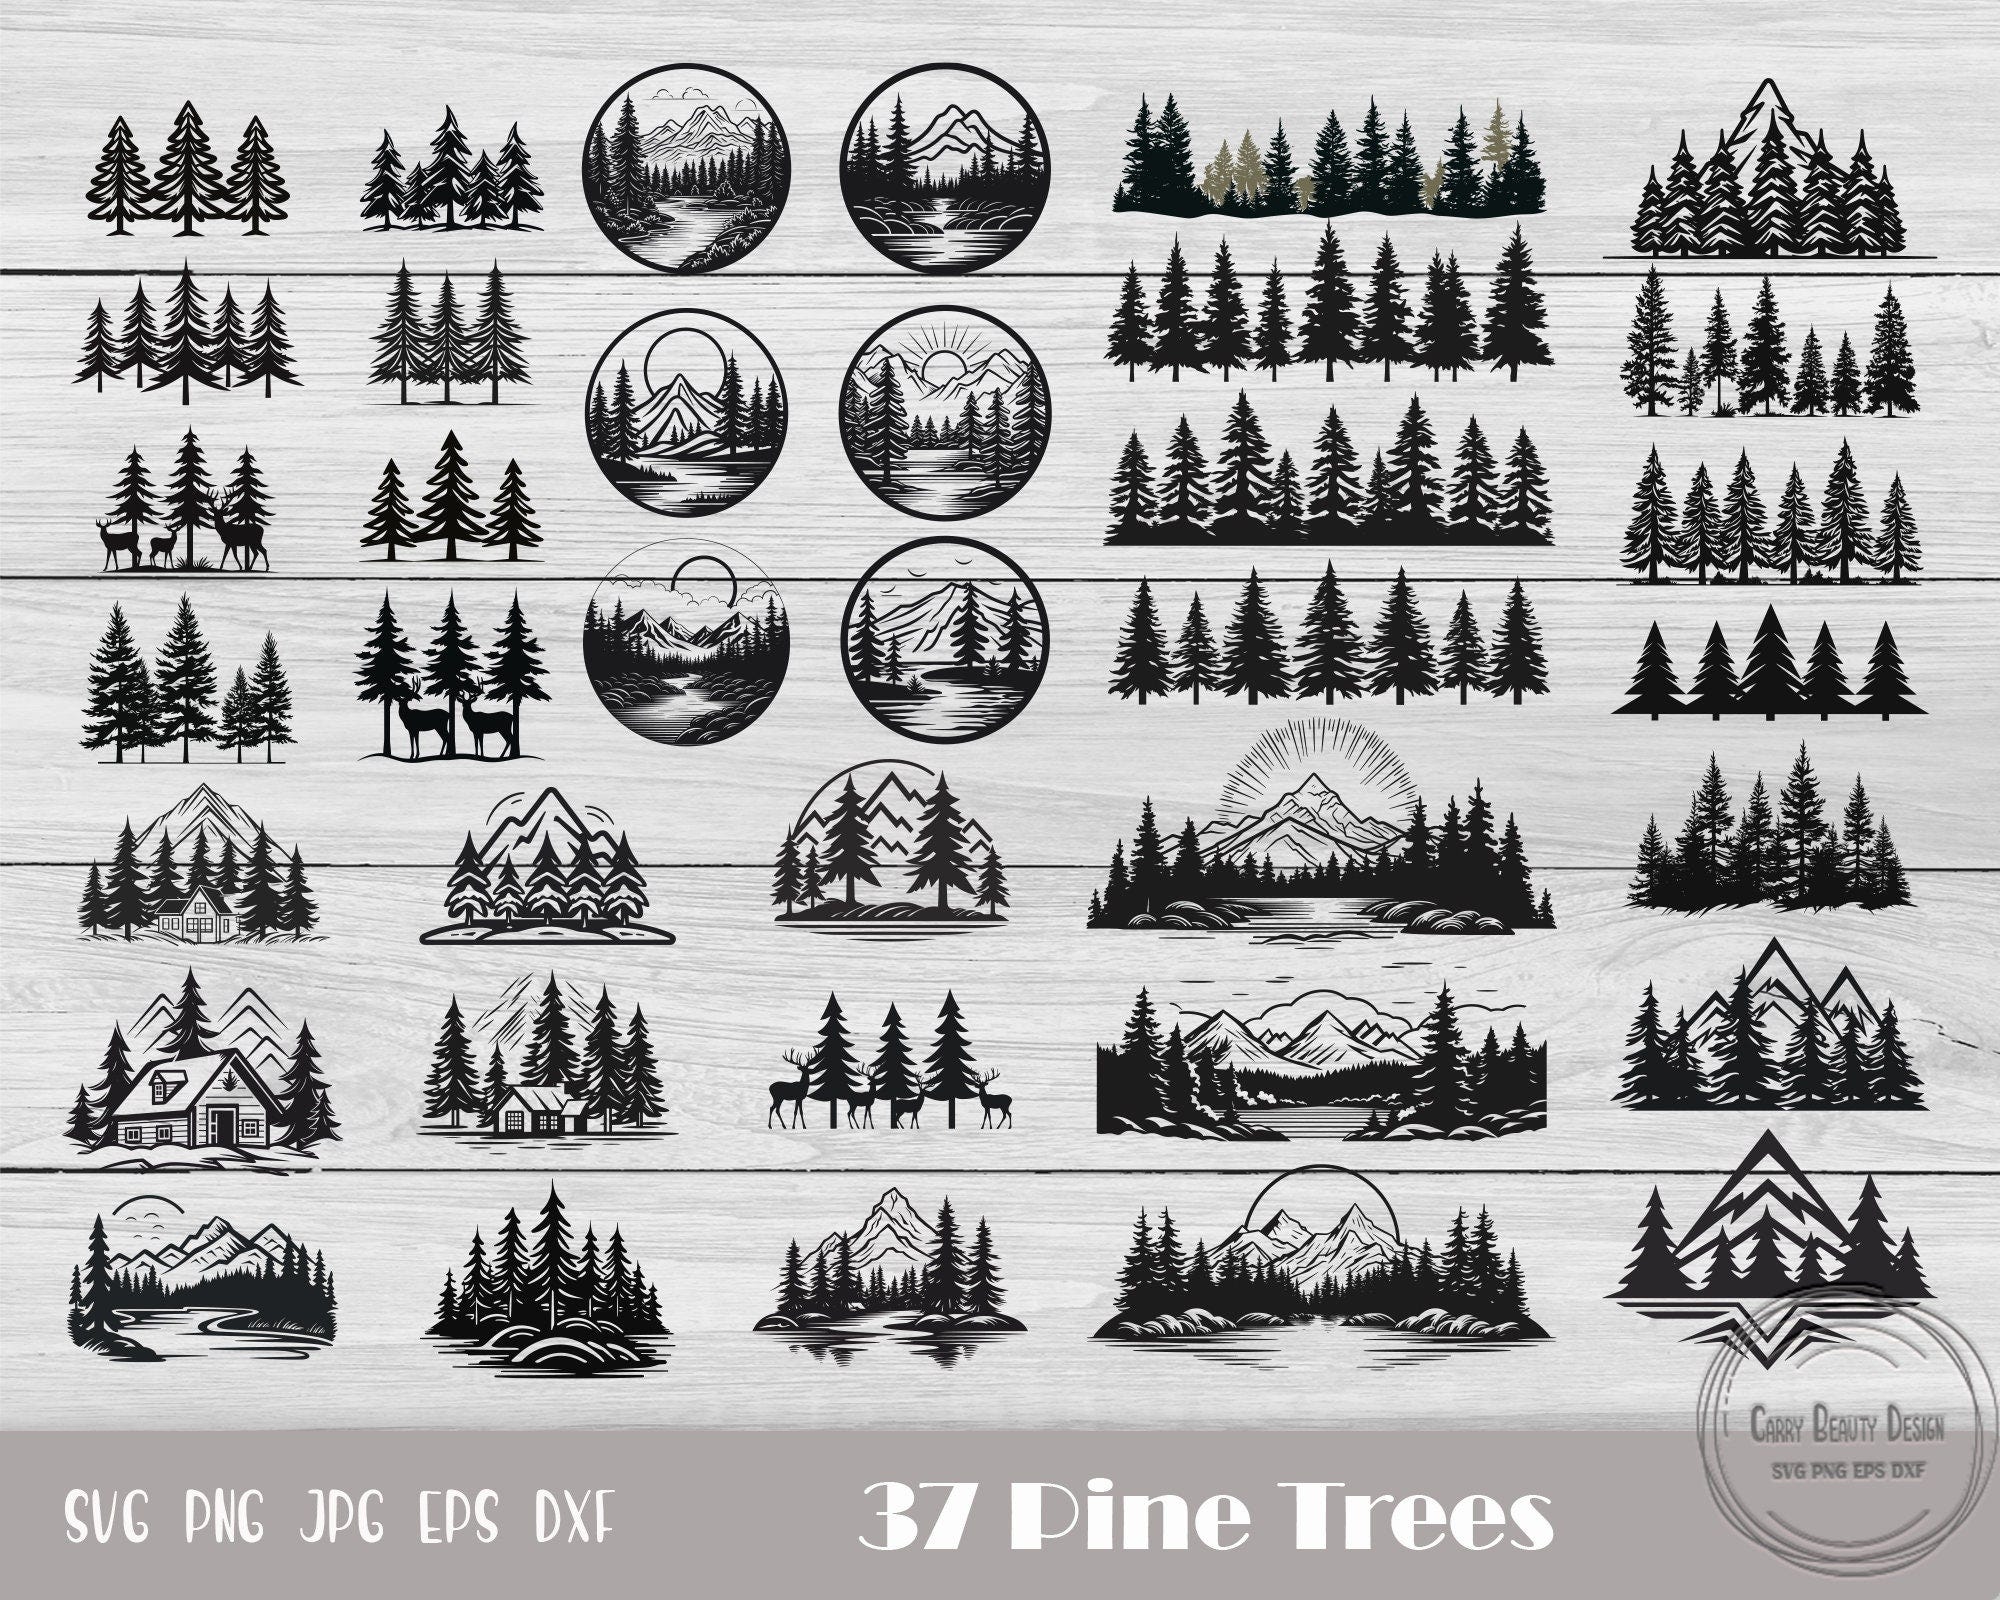 Tree Silhouette Svg, Pine Tree Svg, Forest Silhouette, Pine Tree Cut File, Christmas Tree, Pine Tree Png, Winter Forest, Instant Download